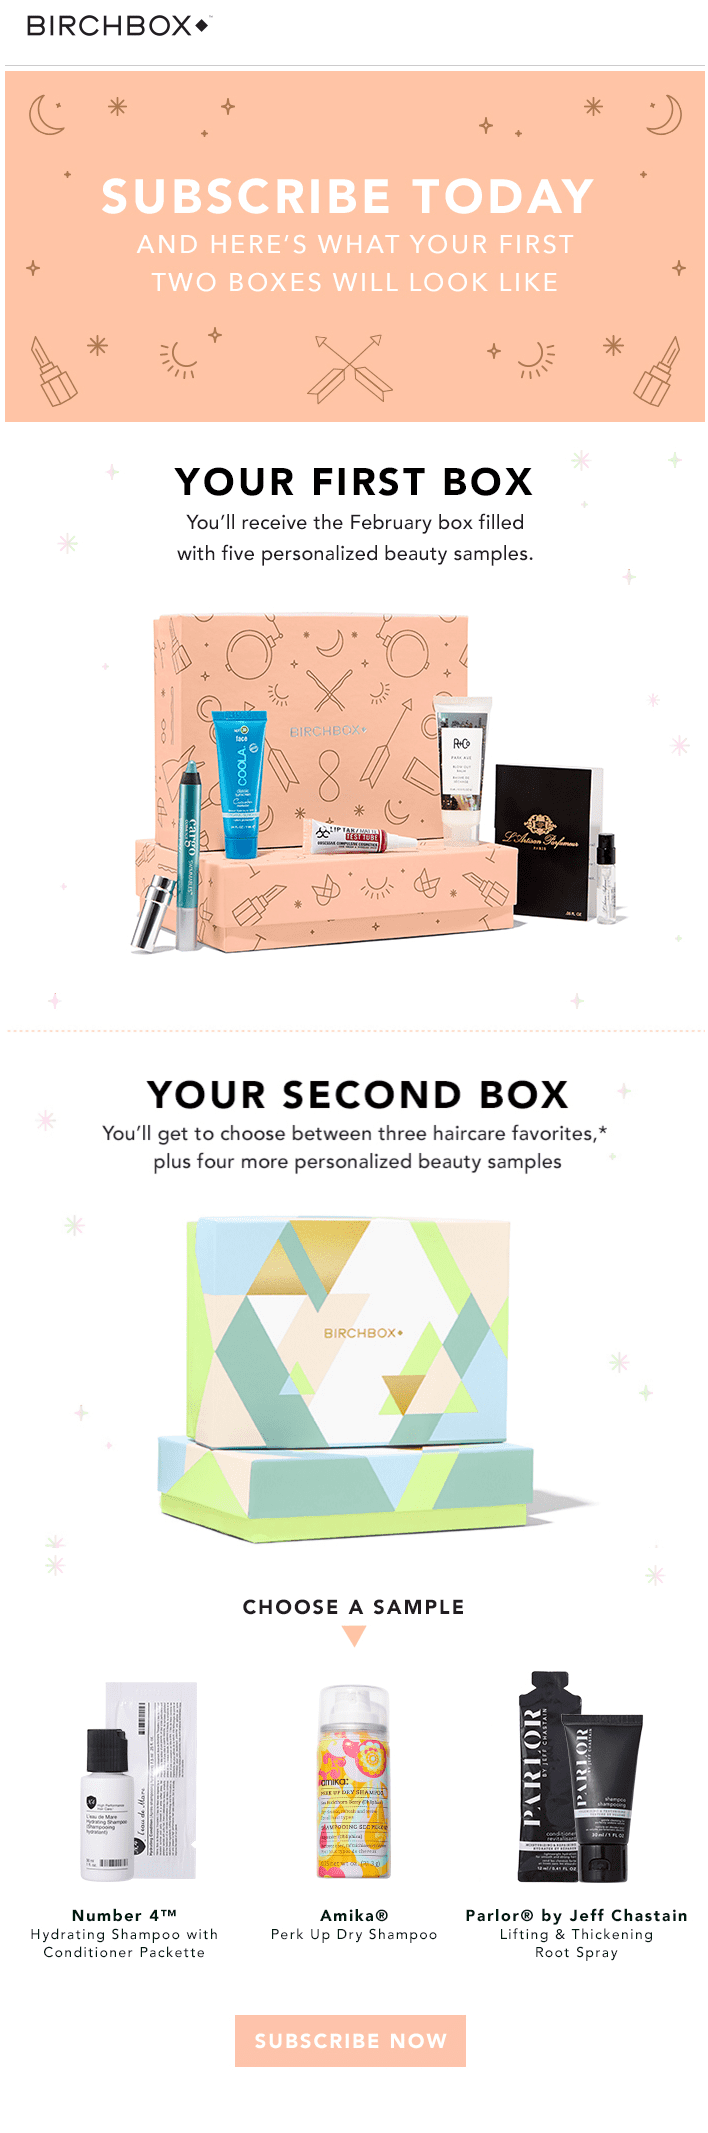 Birchbox click-through rate vs click-to-open rate